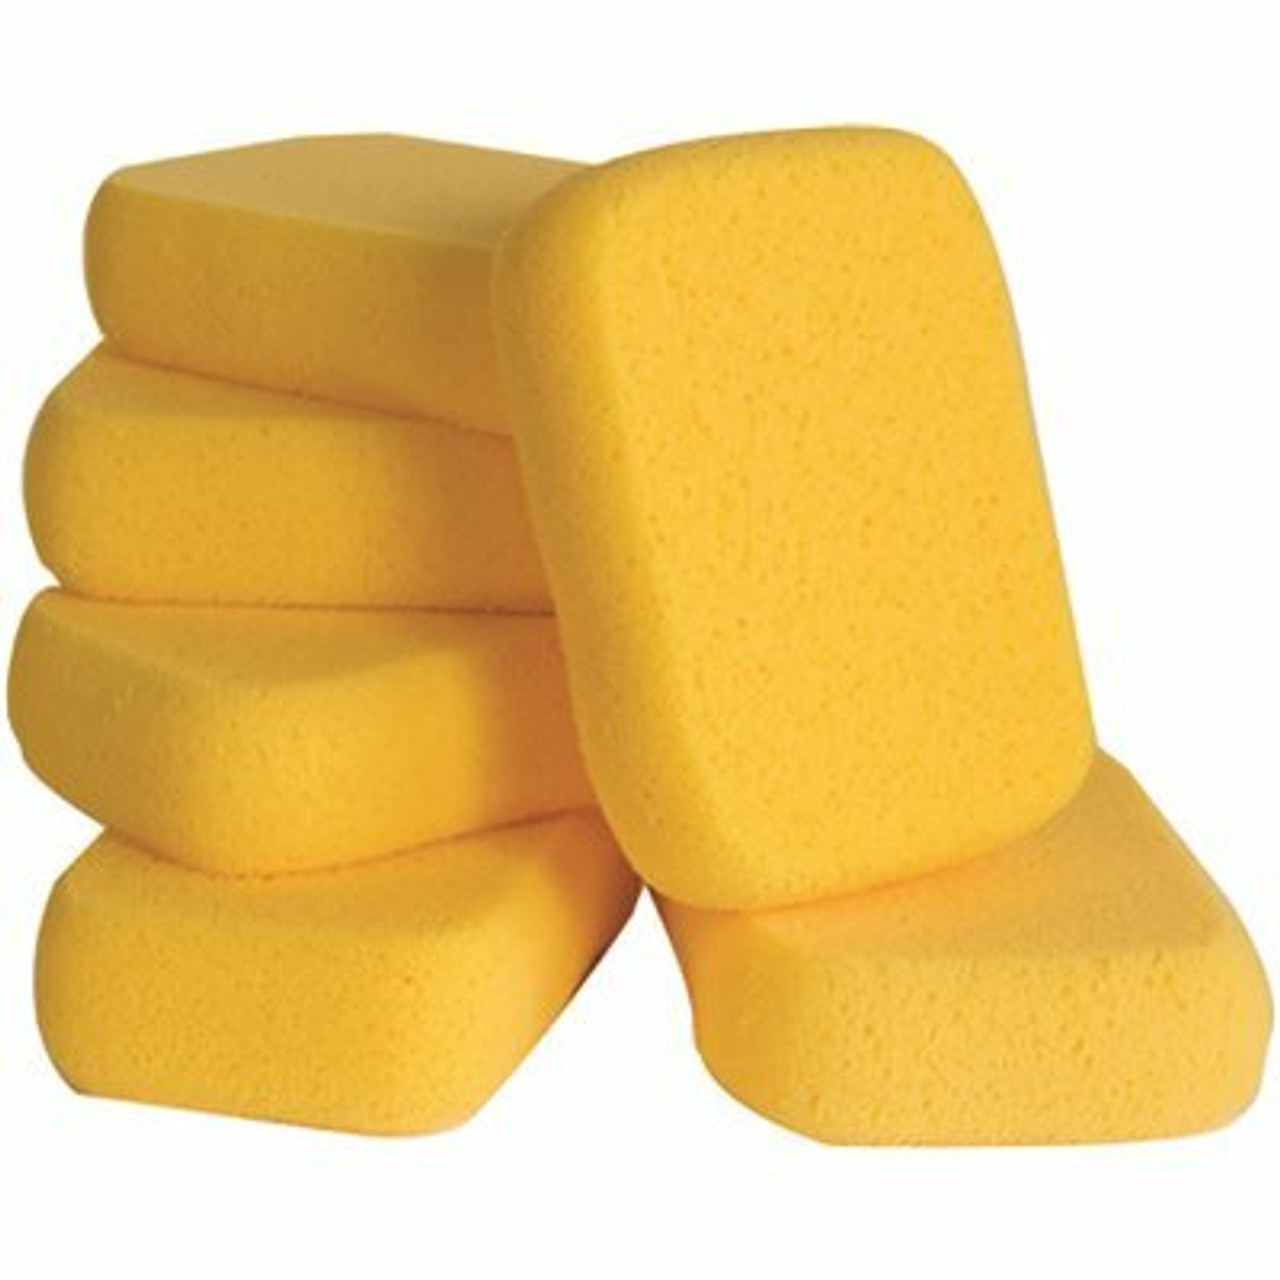 Qep 7-1/2 In. X 5-1/2 In. Extra Large Grouting, Cleaning And Washing Sponge (6-Pack)